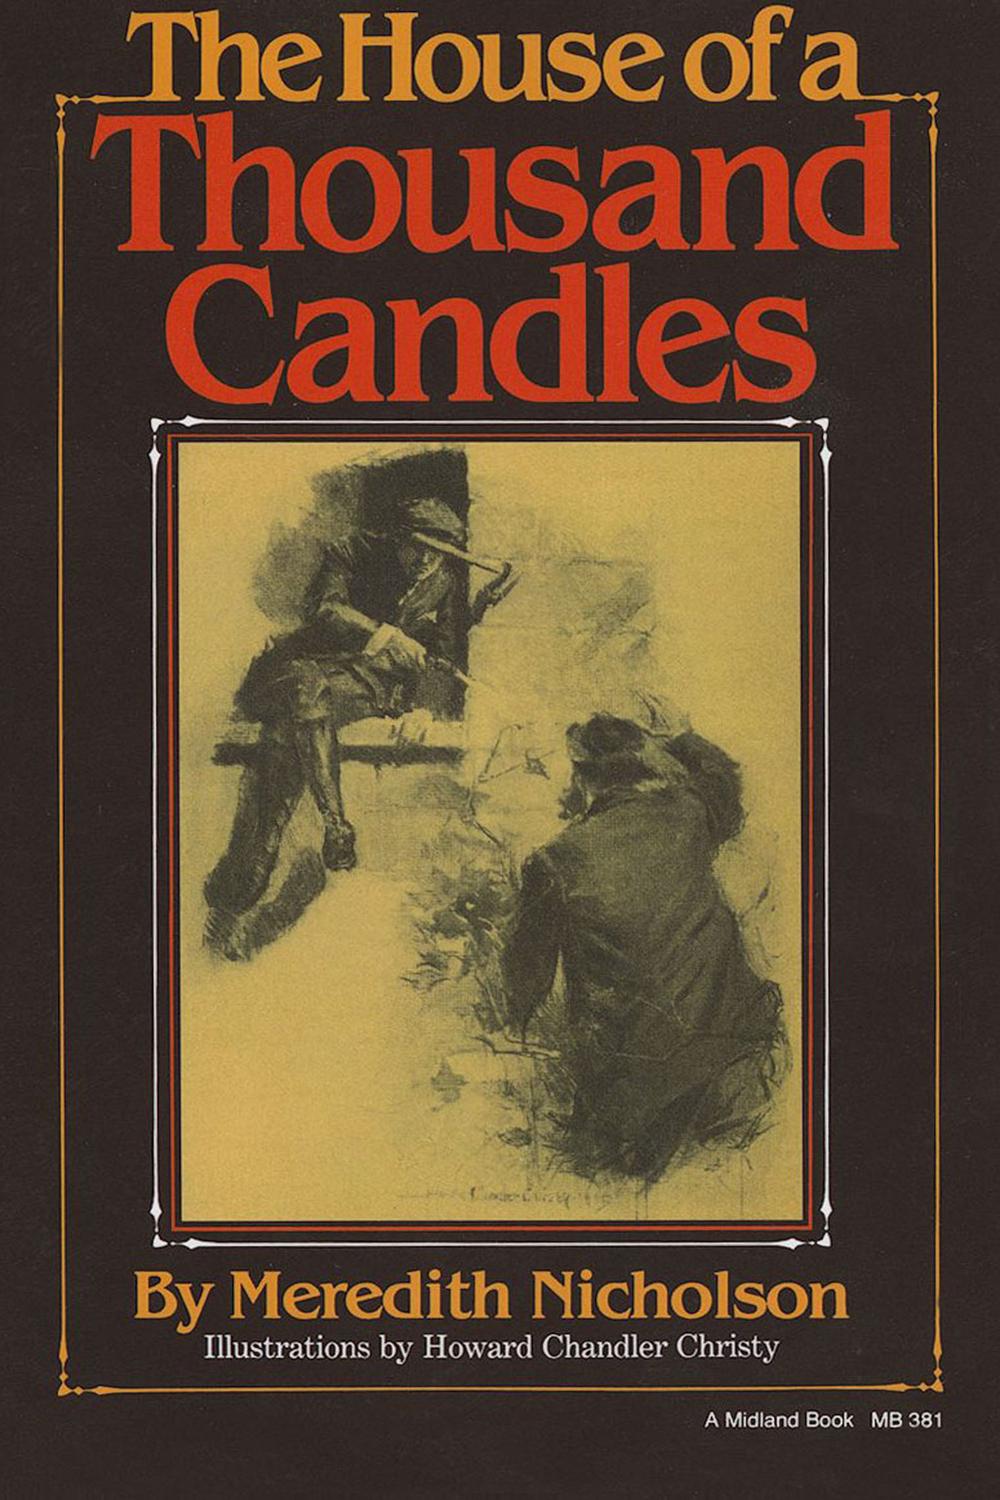 The House of a Thousand Candles - Meredith Nicholson, Howard Chandler Christy,,